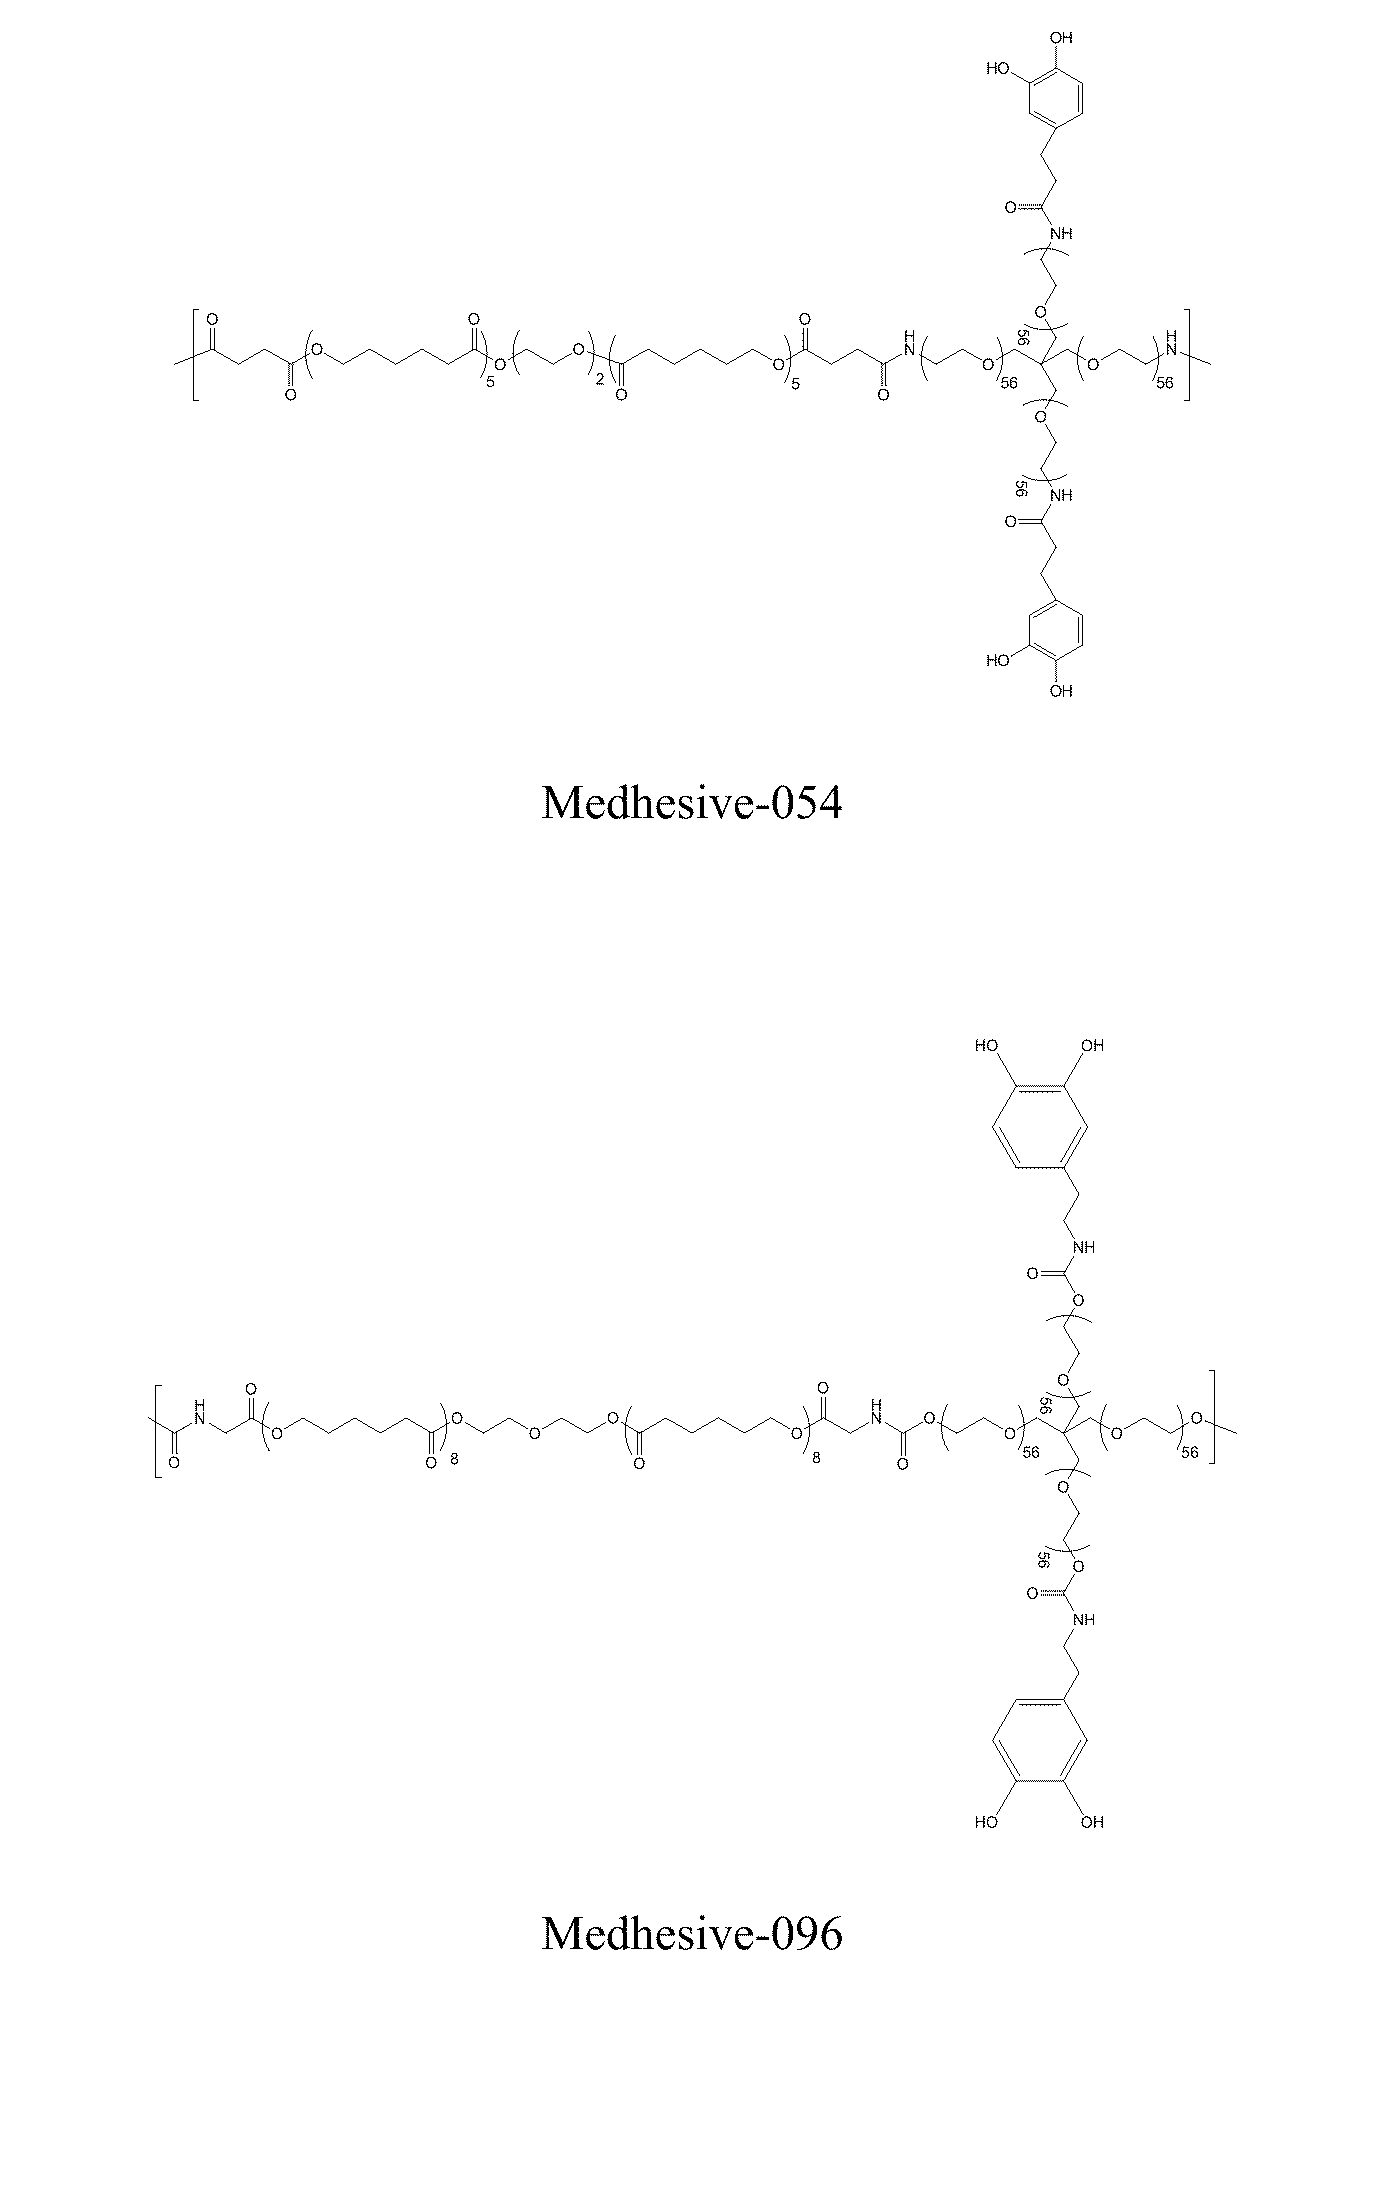 Bioadhesive compounds and methods of synthesis and use